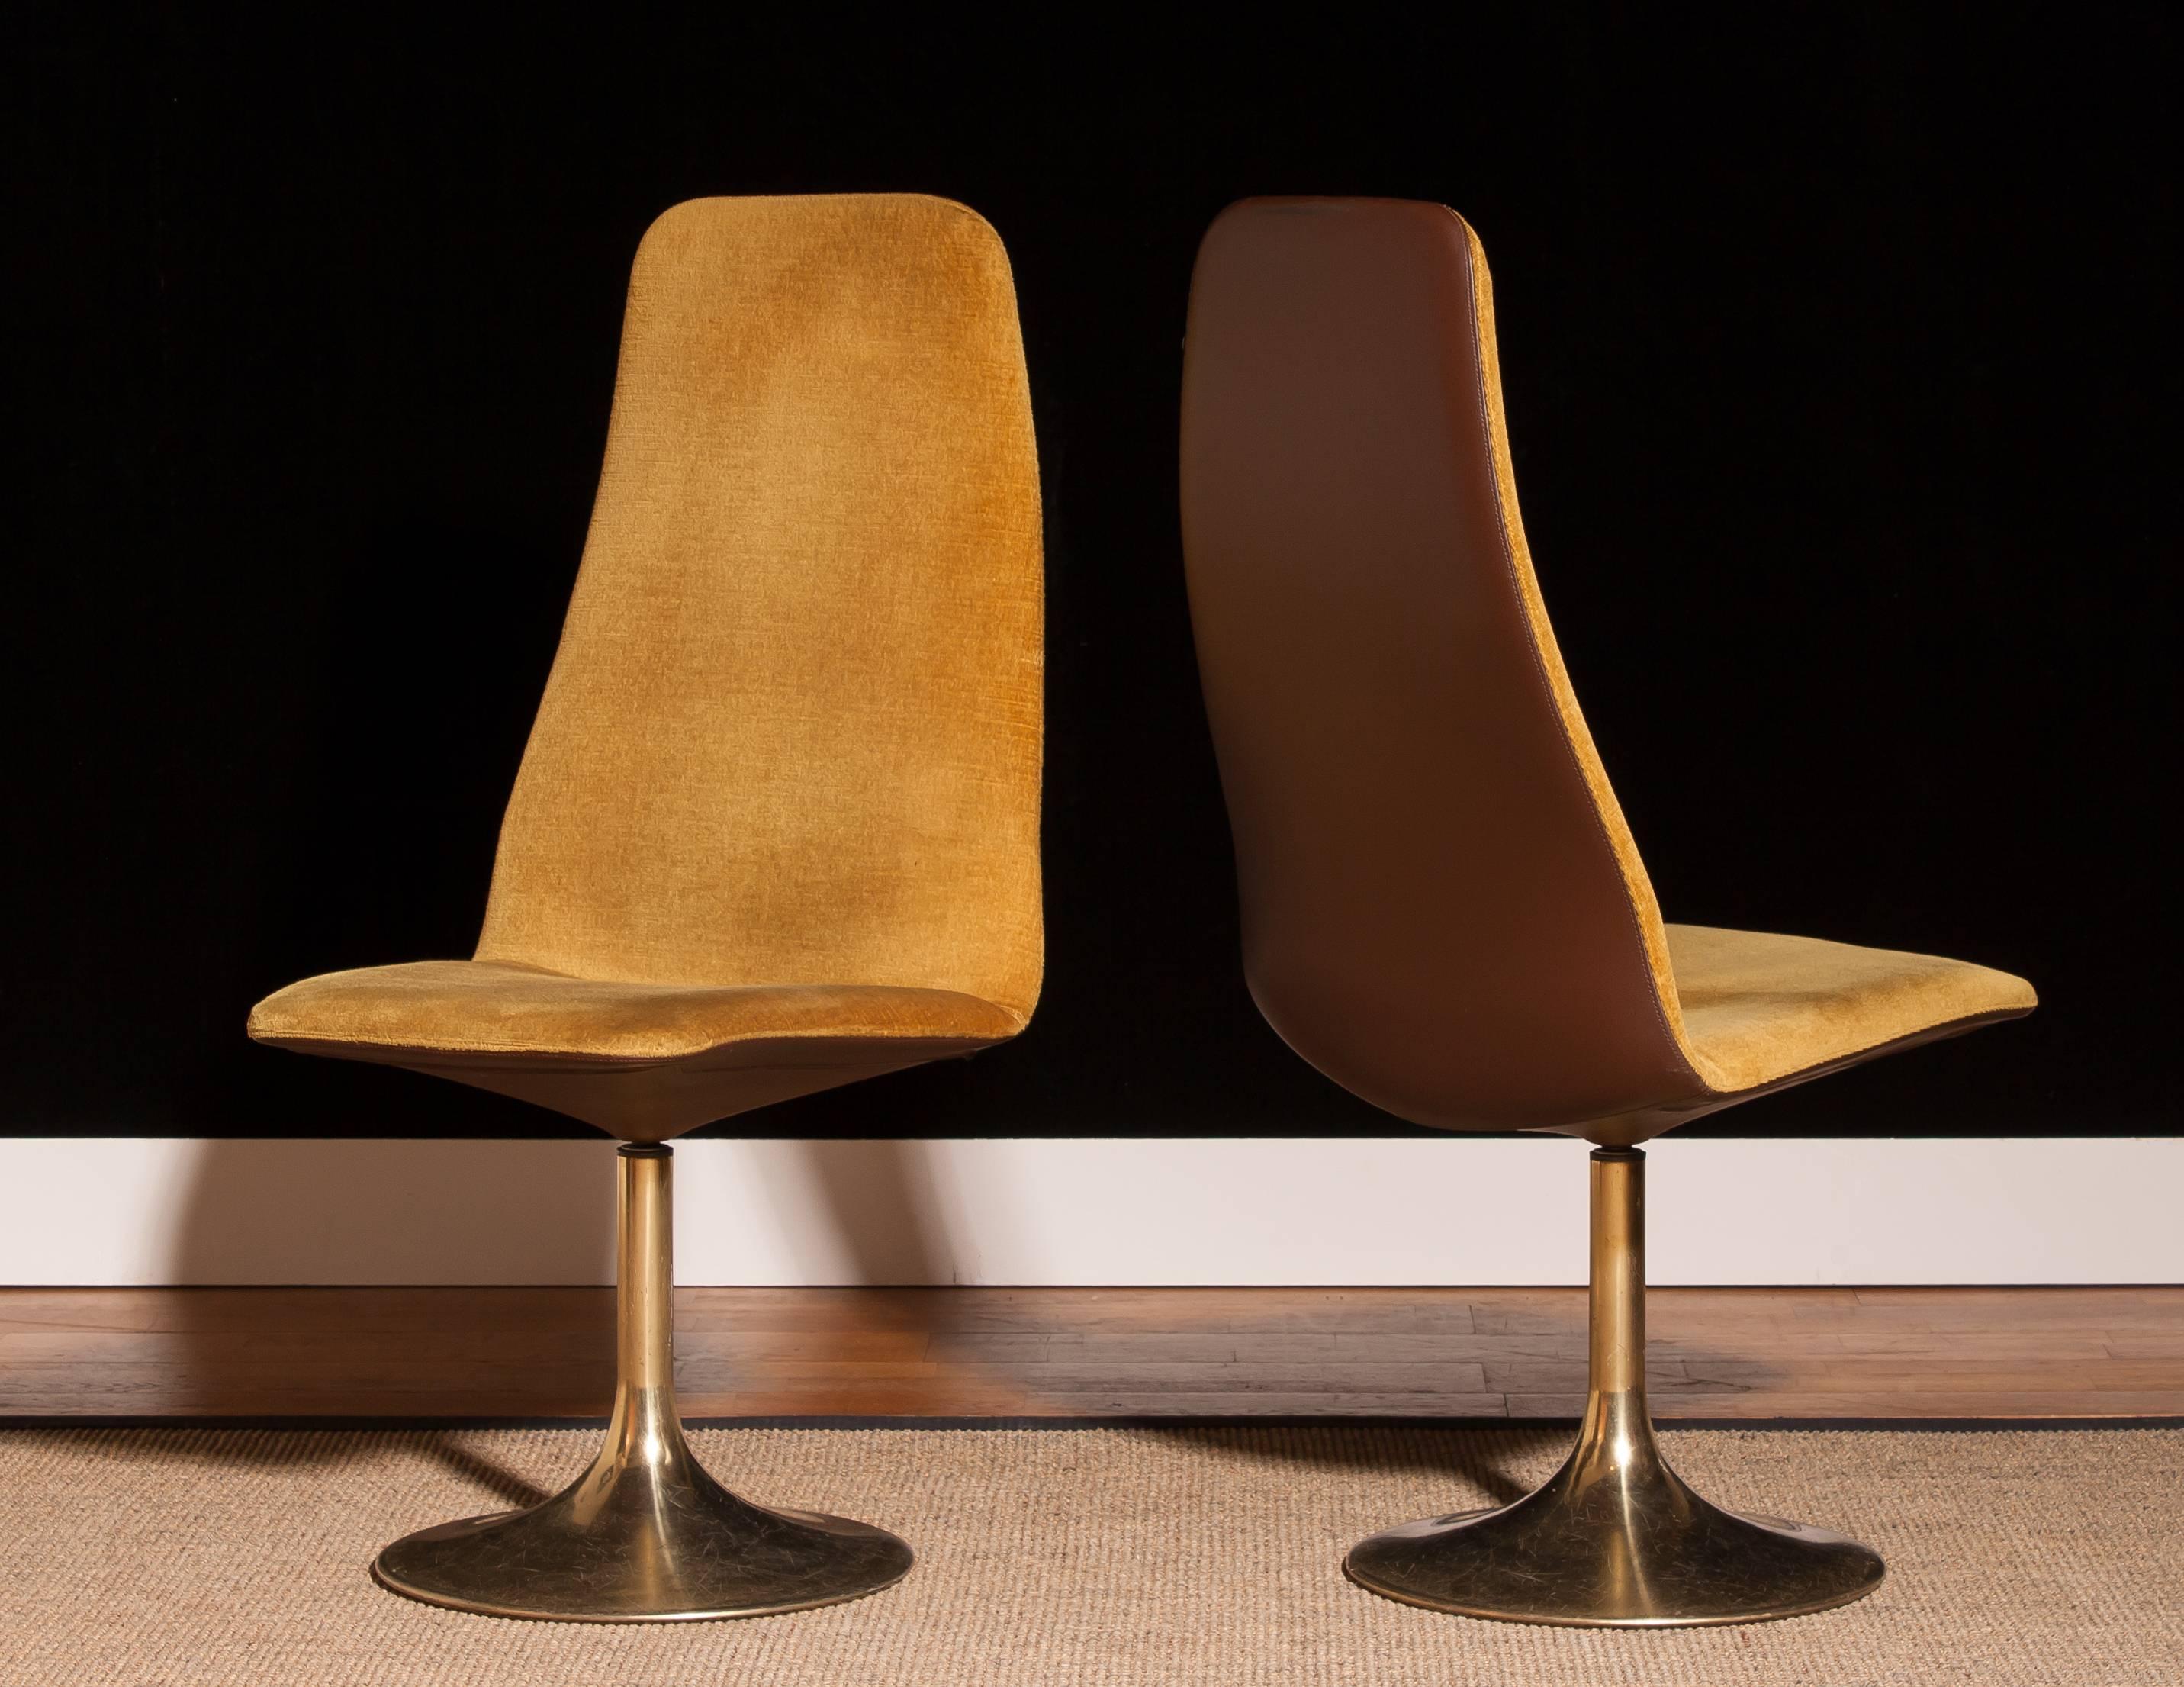 Very nice pair of swivel chairs by Johanson Design for Markaryd Sweden.
The chairs have a brass tulip swivel feet with golden velour and faux leather upholstery.
They are labelled.
Period 1970s
Dimensions: H 102 cm, W 50 cm, D 48 cm, SH 44 cm.